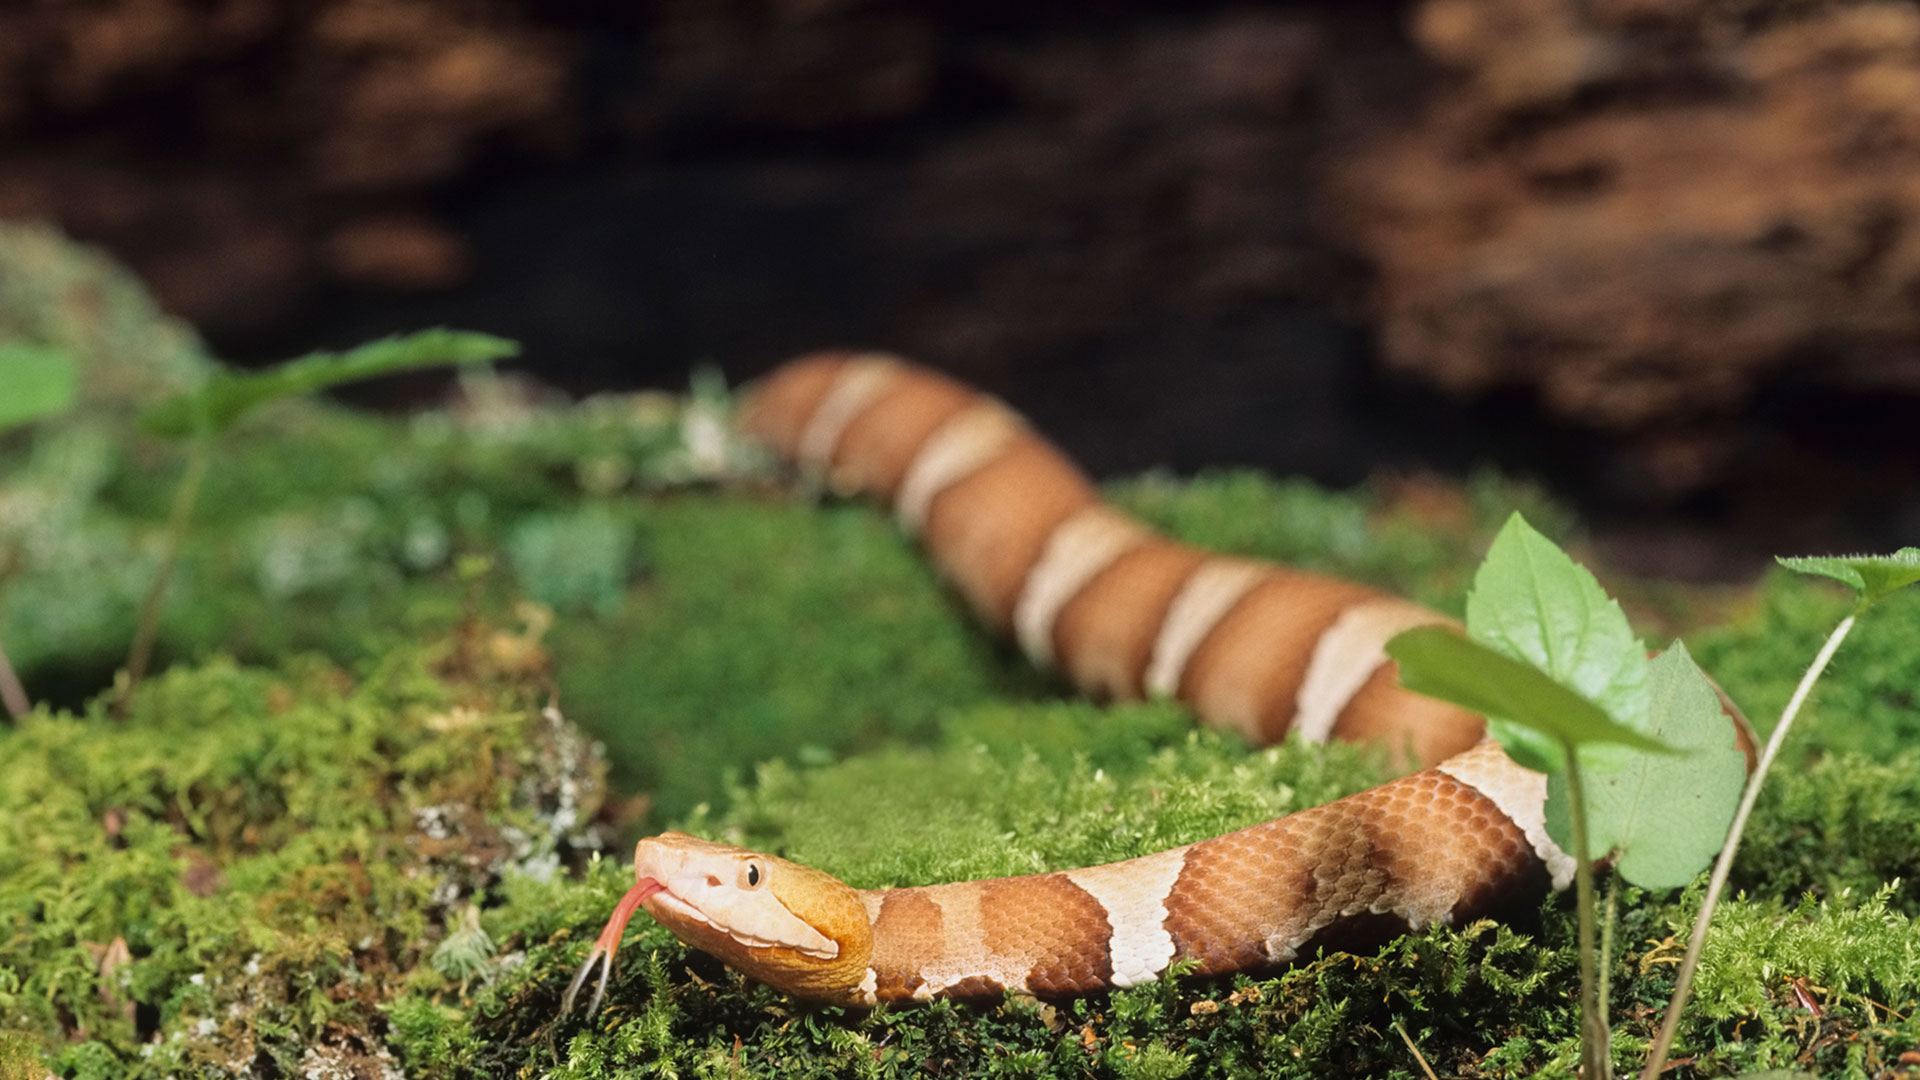 Venomous snake bites are unfortunately on the rise in North Carolina, so we spoke to a poison control expert about steps you can take to keep you and your family safe from these reptiles this summer.